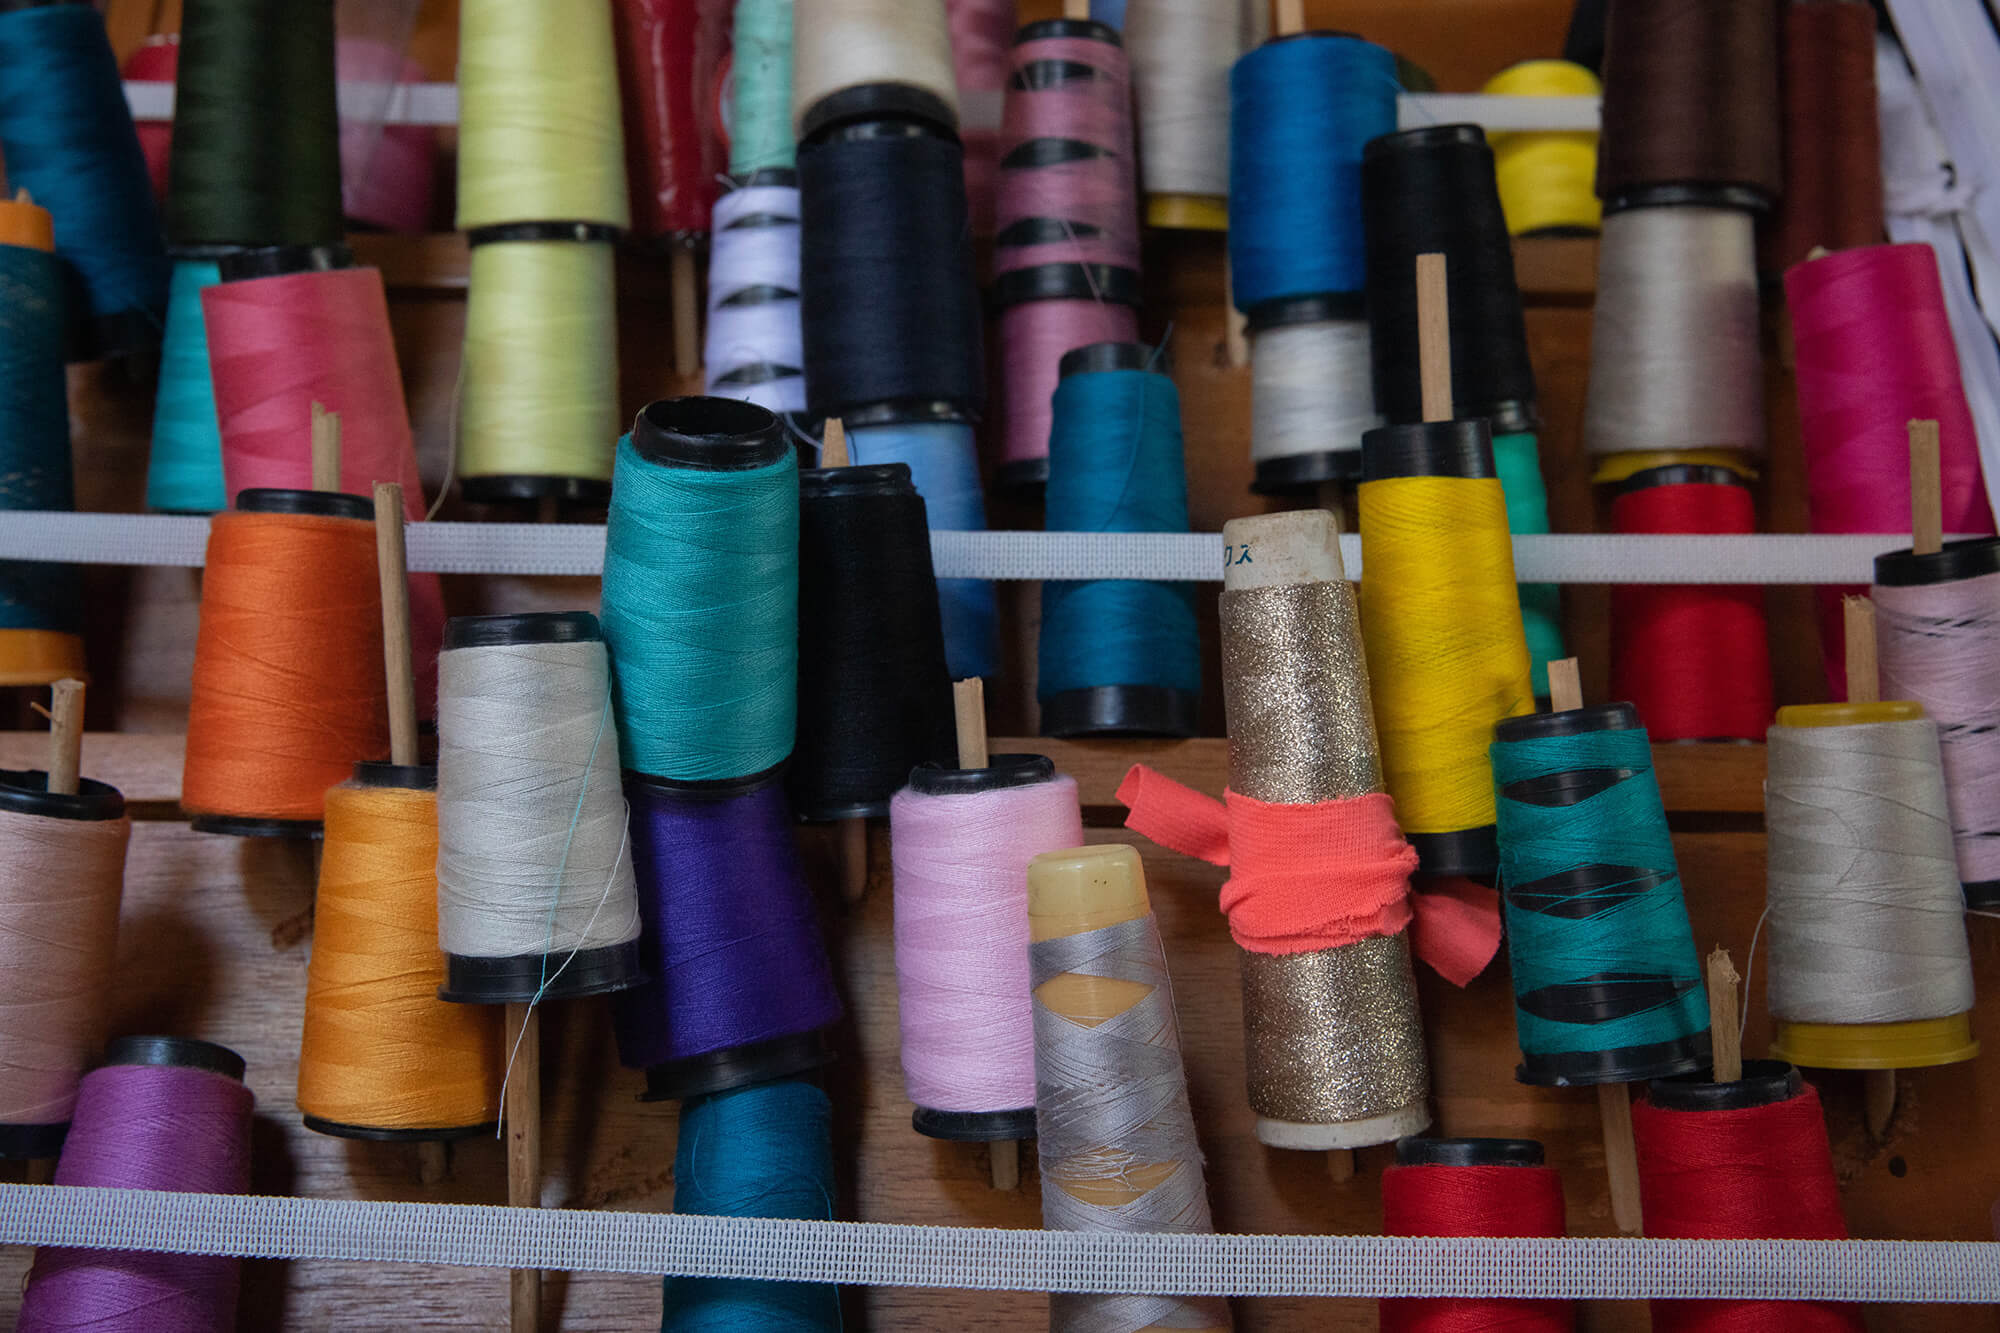 Spools of thread in many different colors sit upright on a wooden shelf in Alava’s workshop. These threads are used for sewing various items.